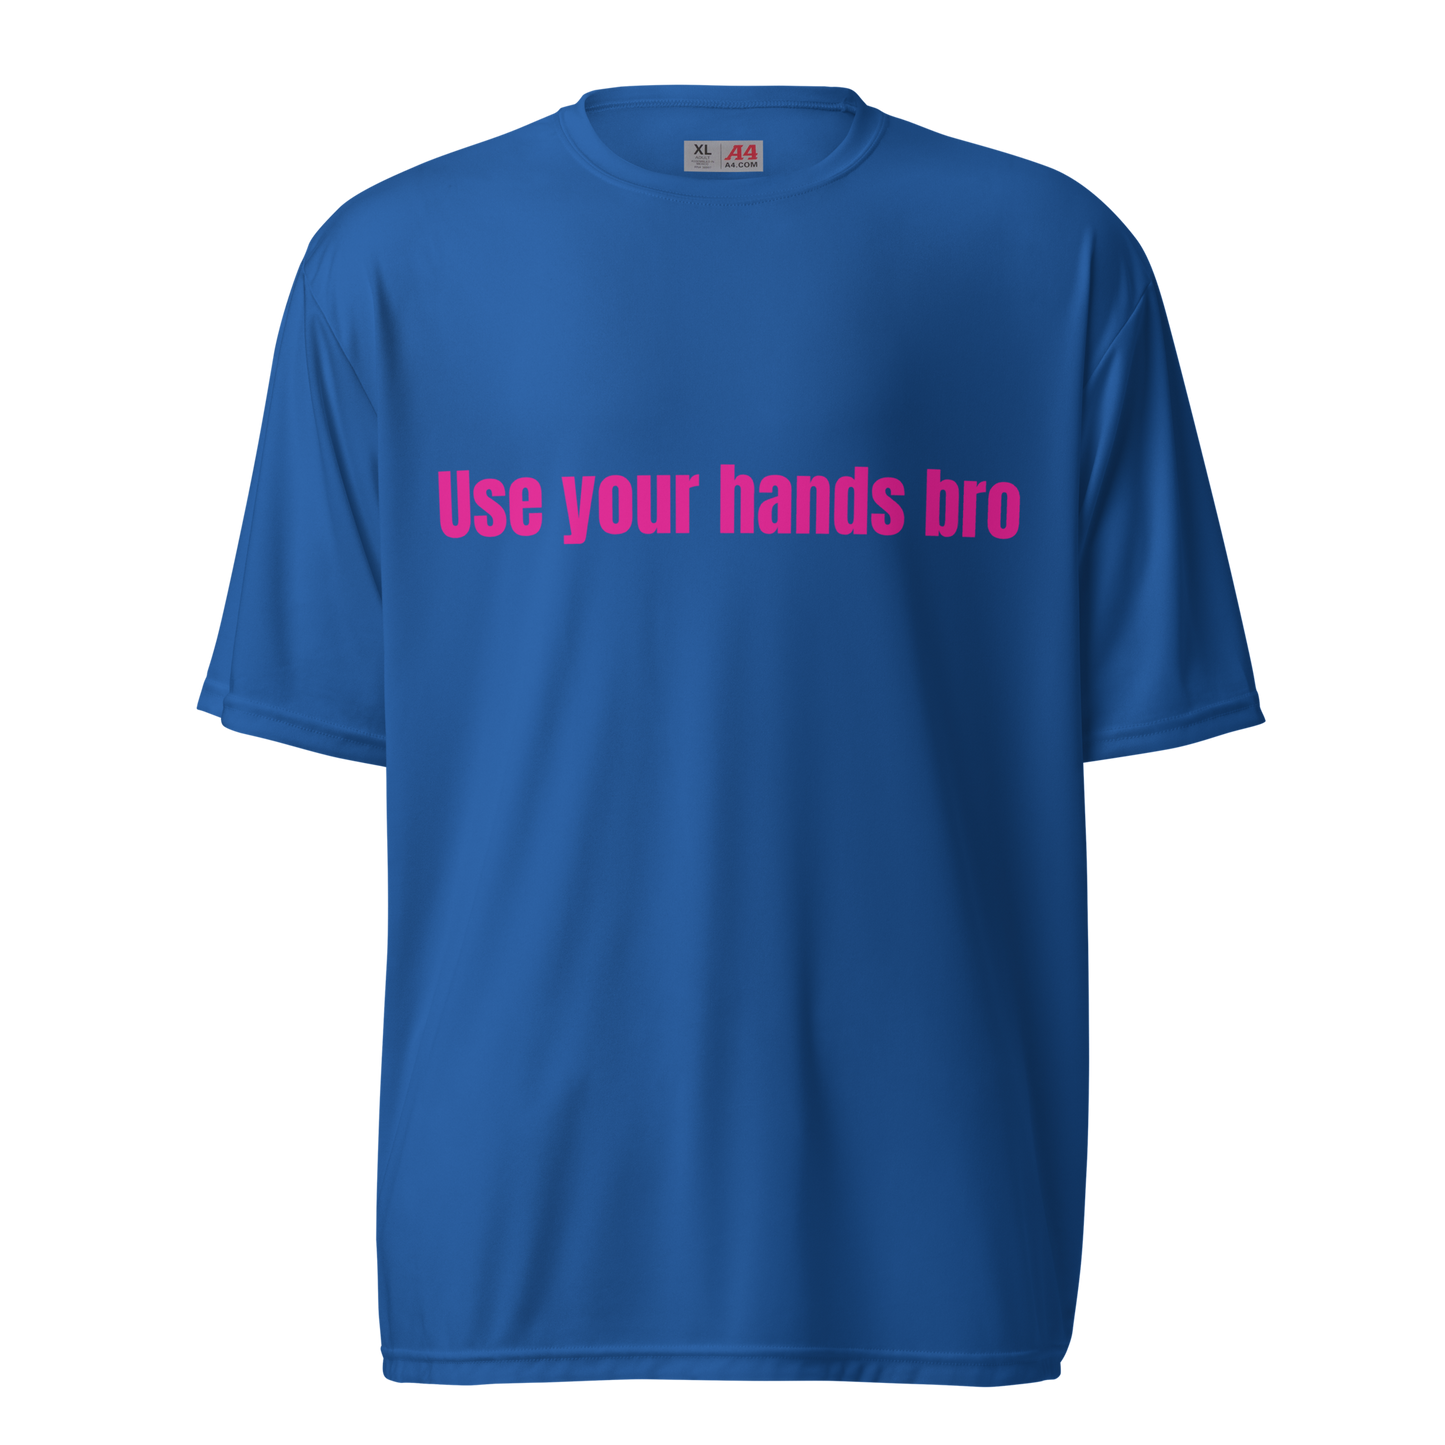 Use Your Hands Bro Unisex Performance T-Shirt